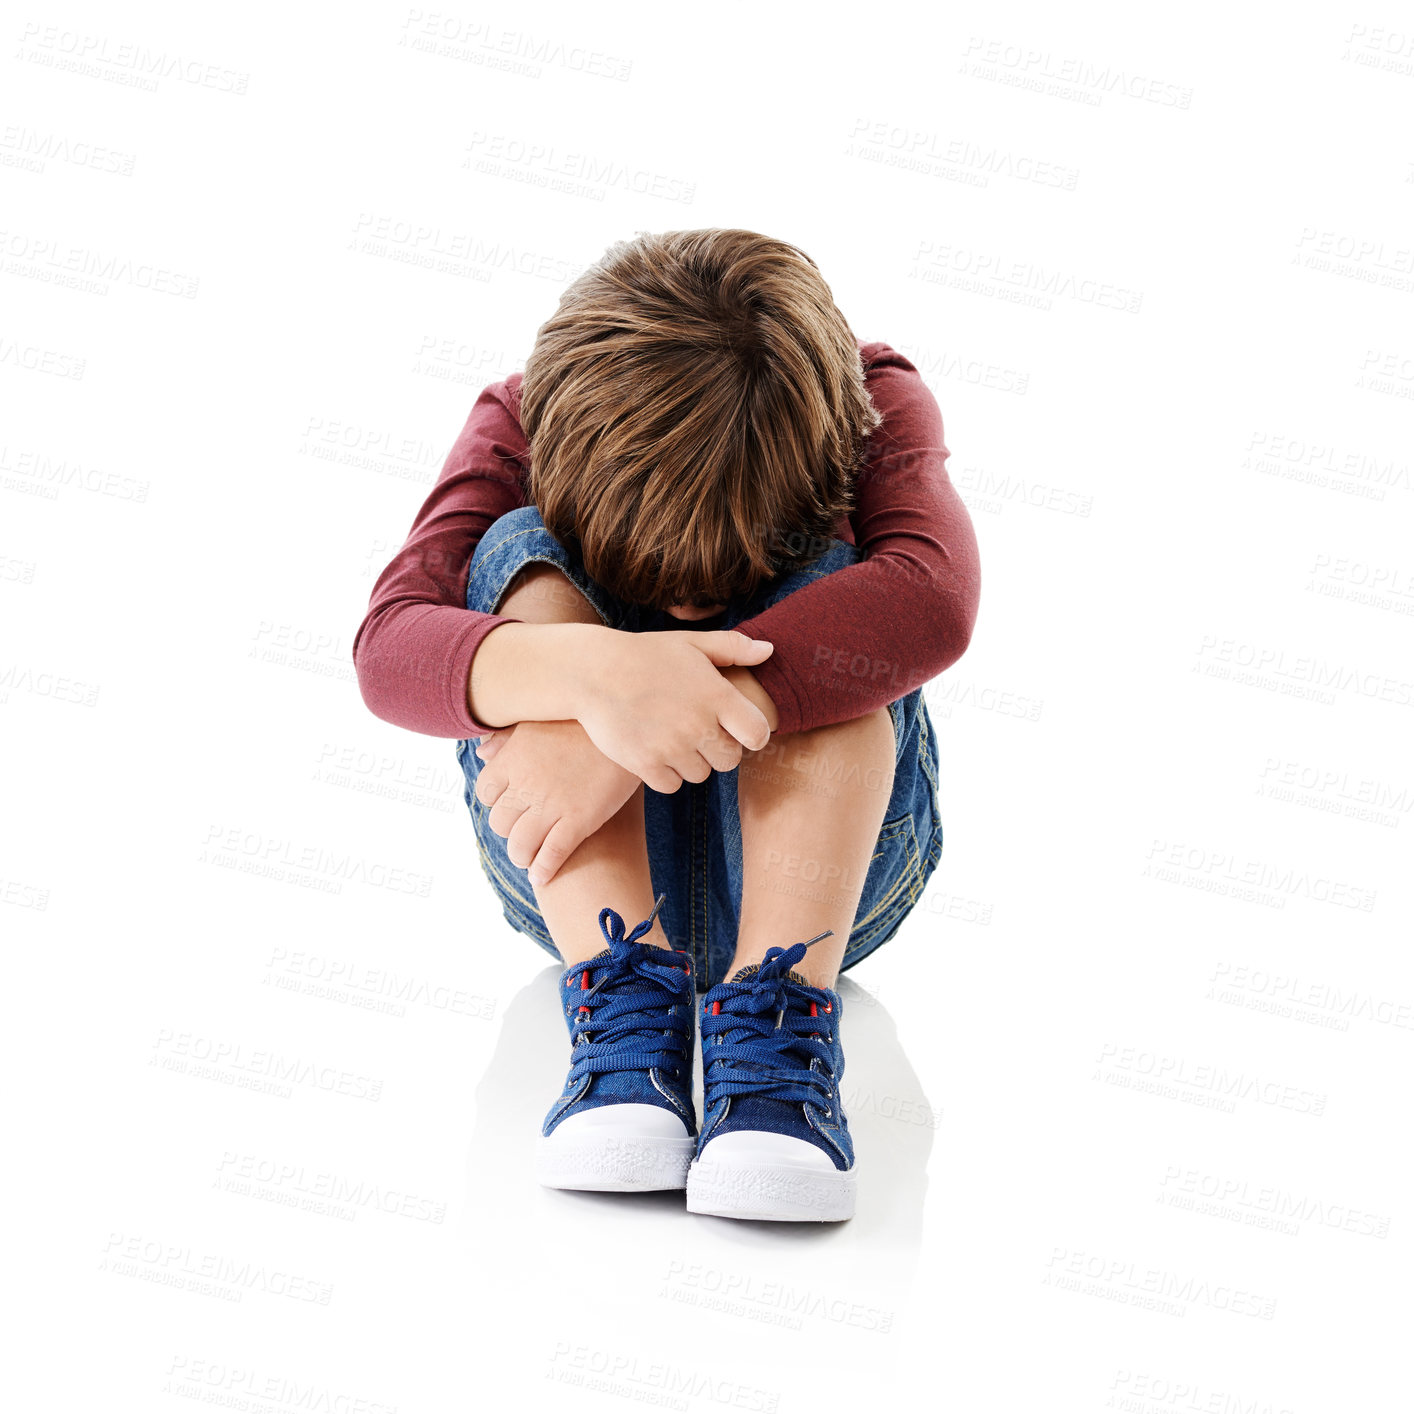 Buy stock photo Studio shot of a little boy with his head buried in his knees against a white background